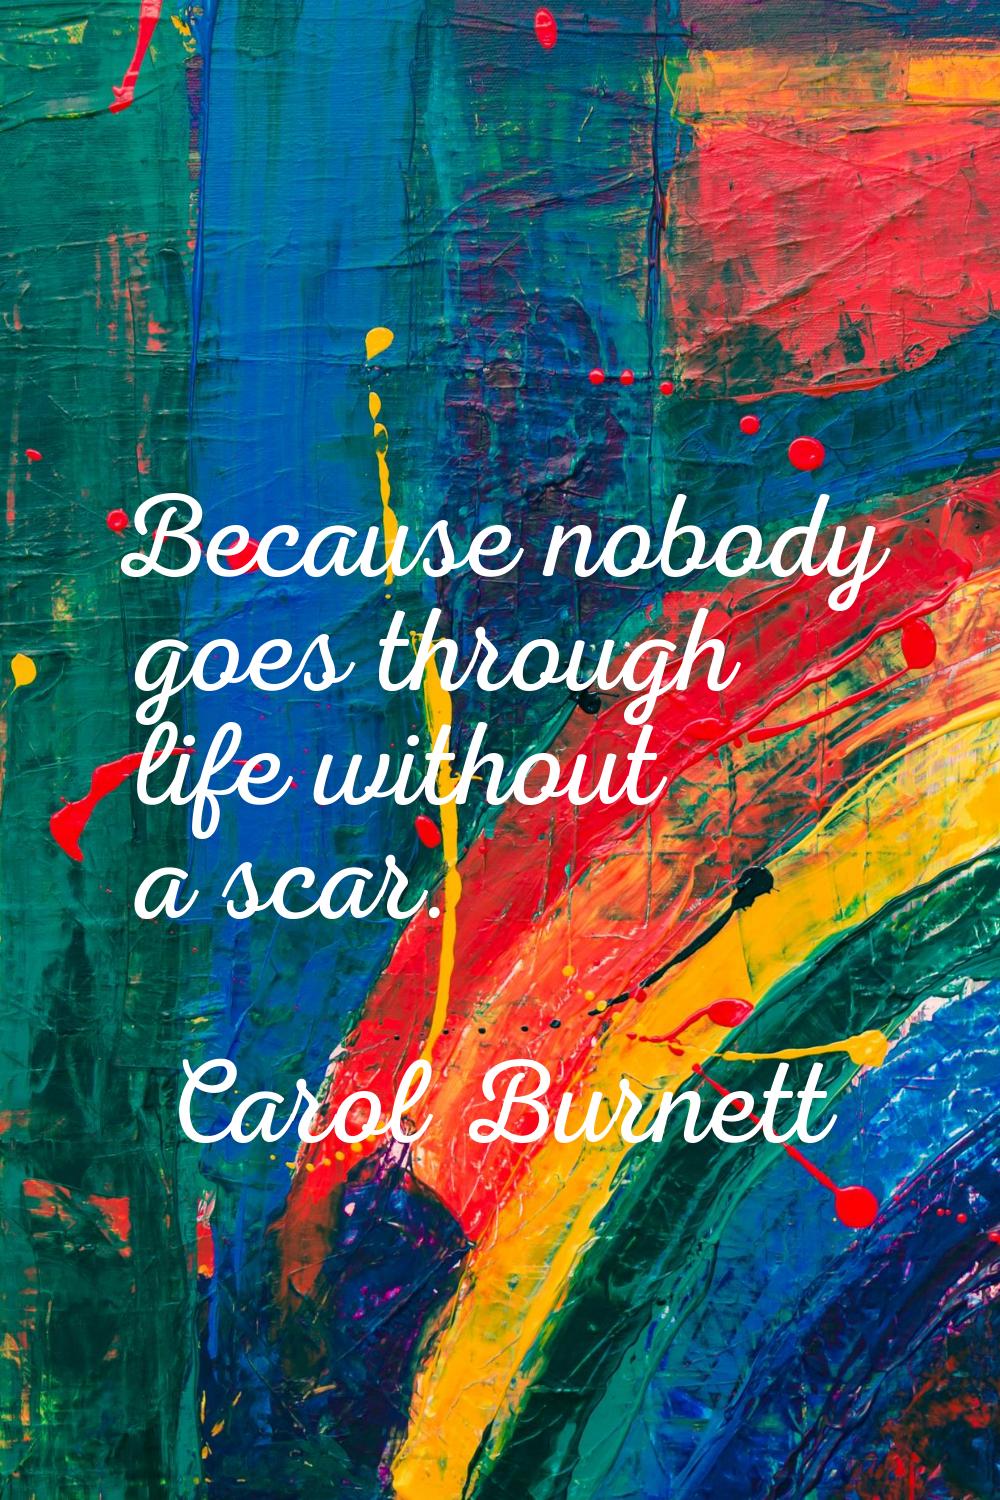 Because nobody goes through life without a scar.